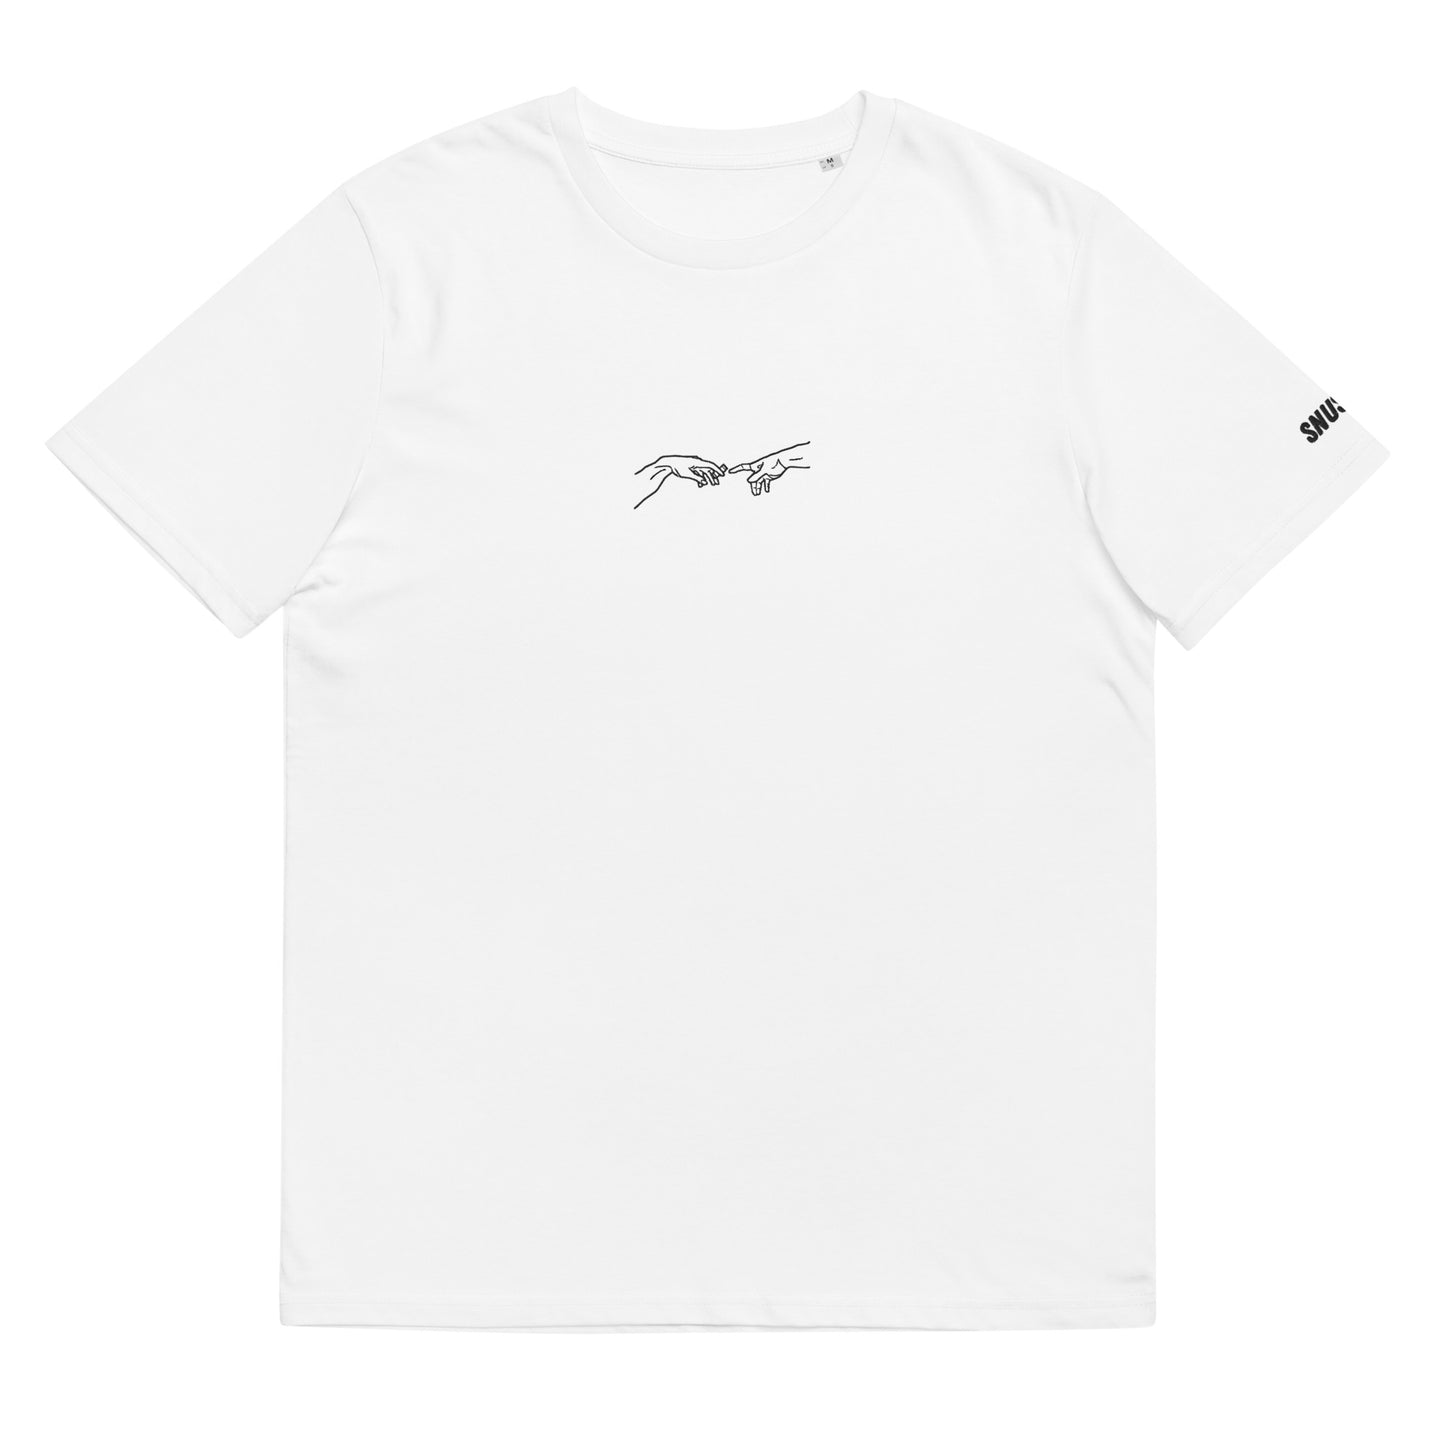 The Creation of Snus T-Shirt